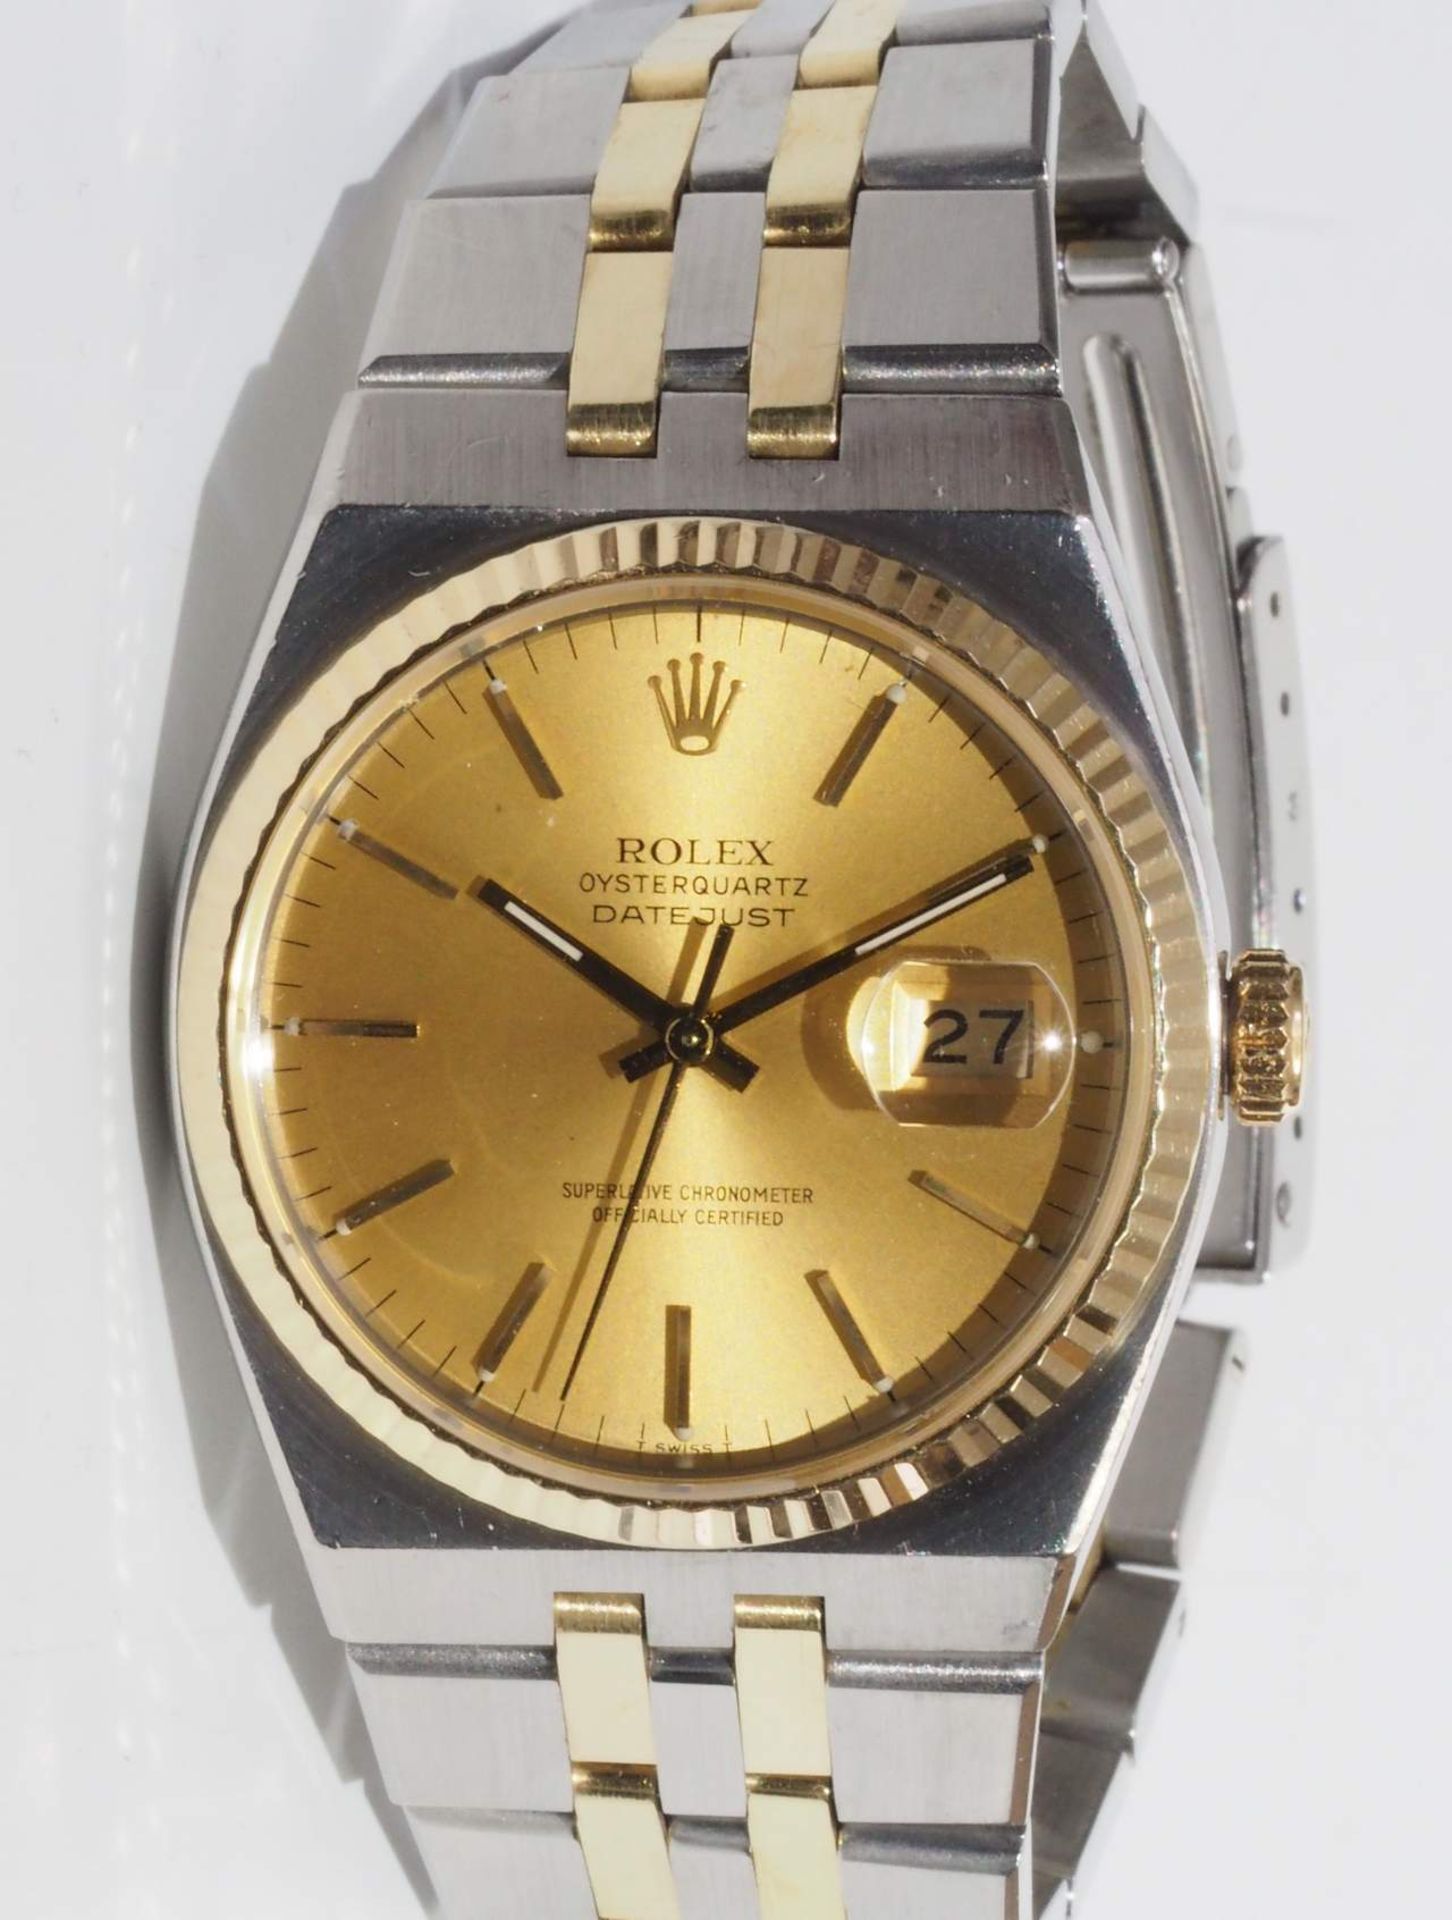 ROLEX Datejust Oysterquarz. - Image 2 of 12